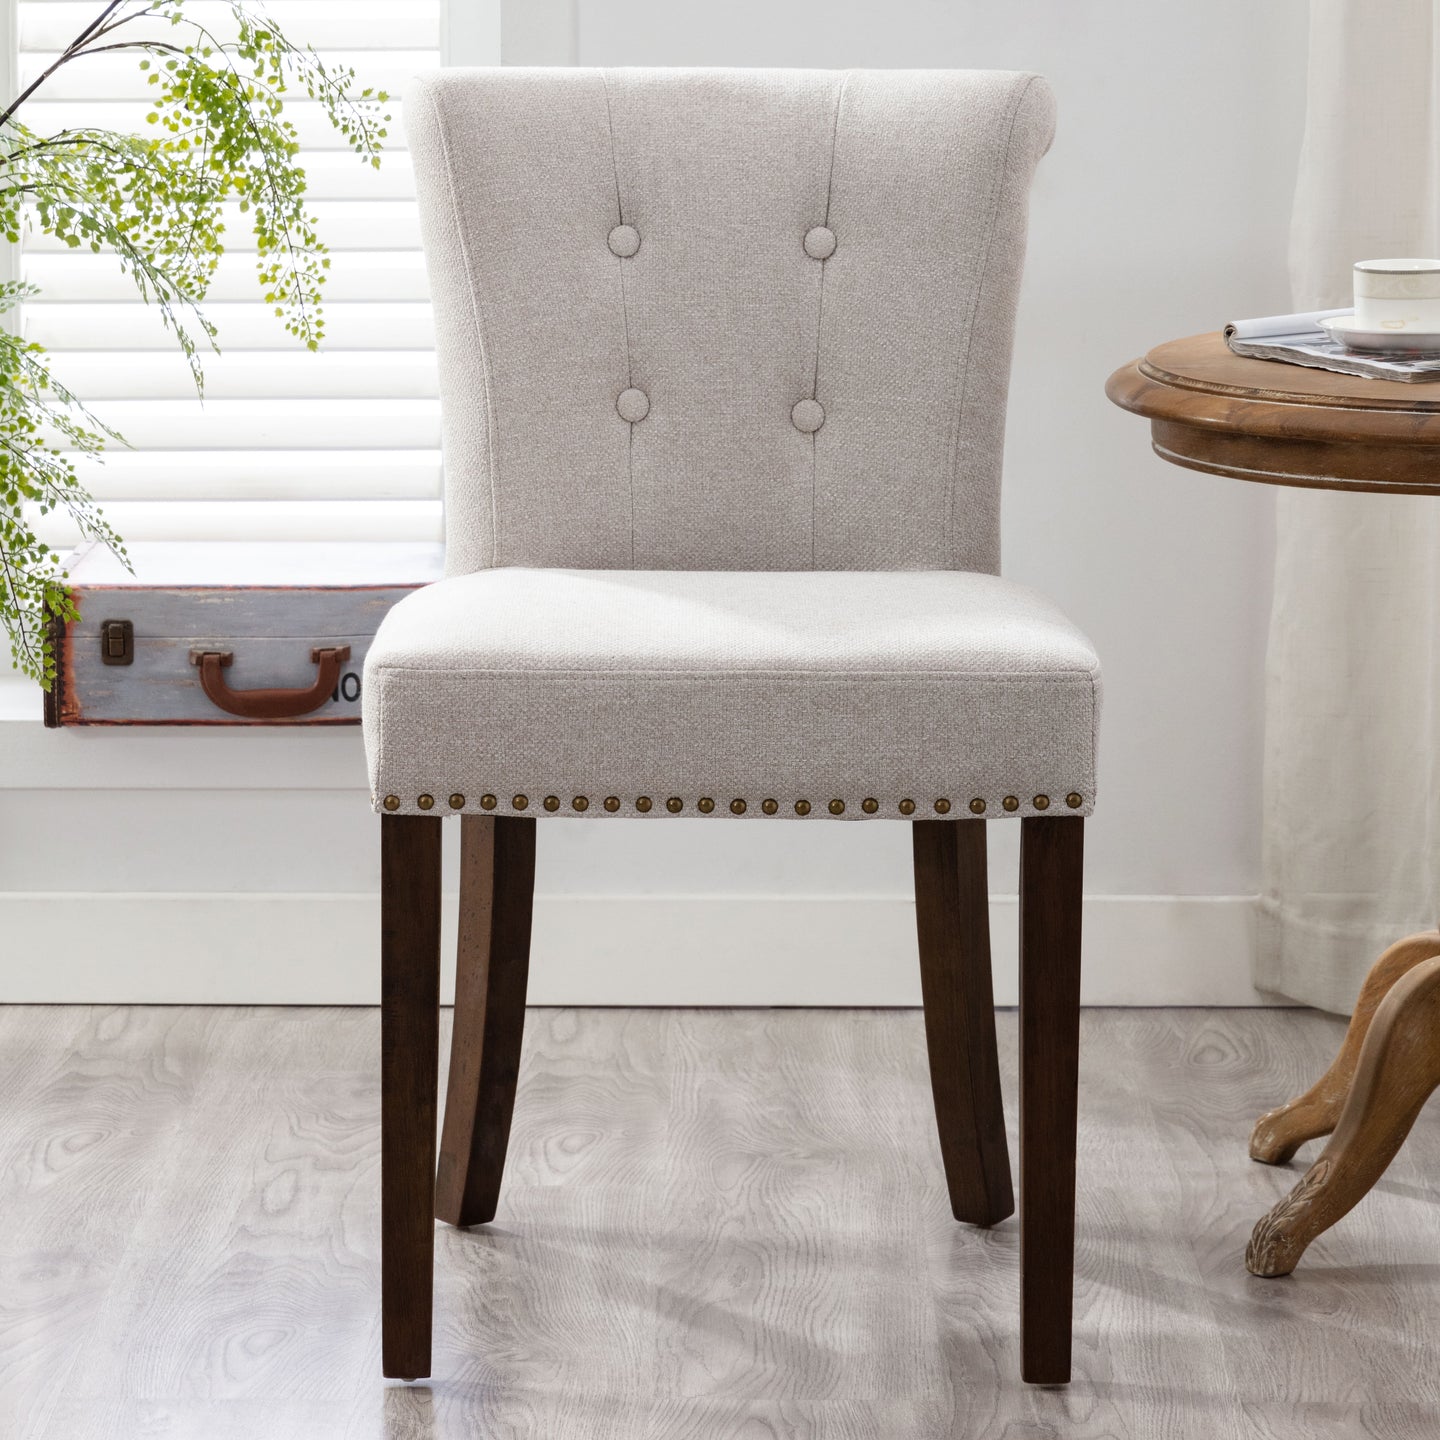 Marcel dining chair